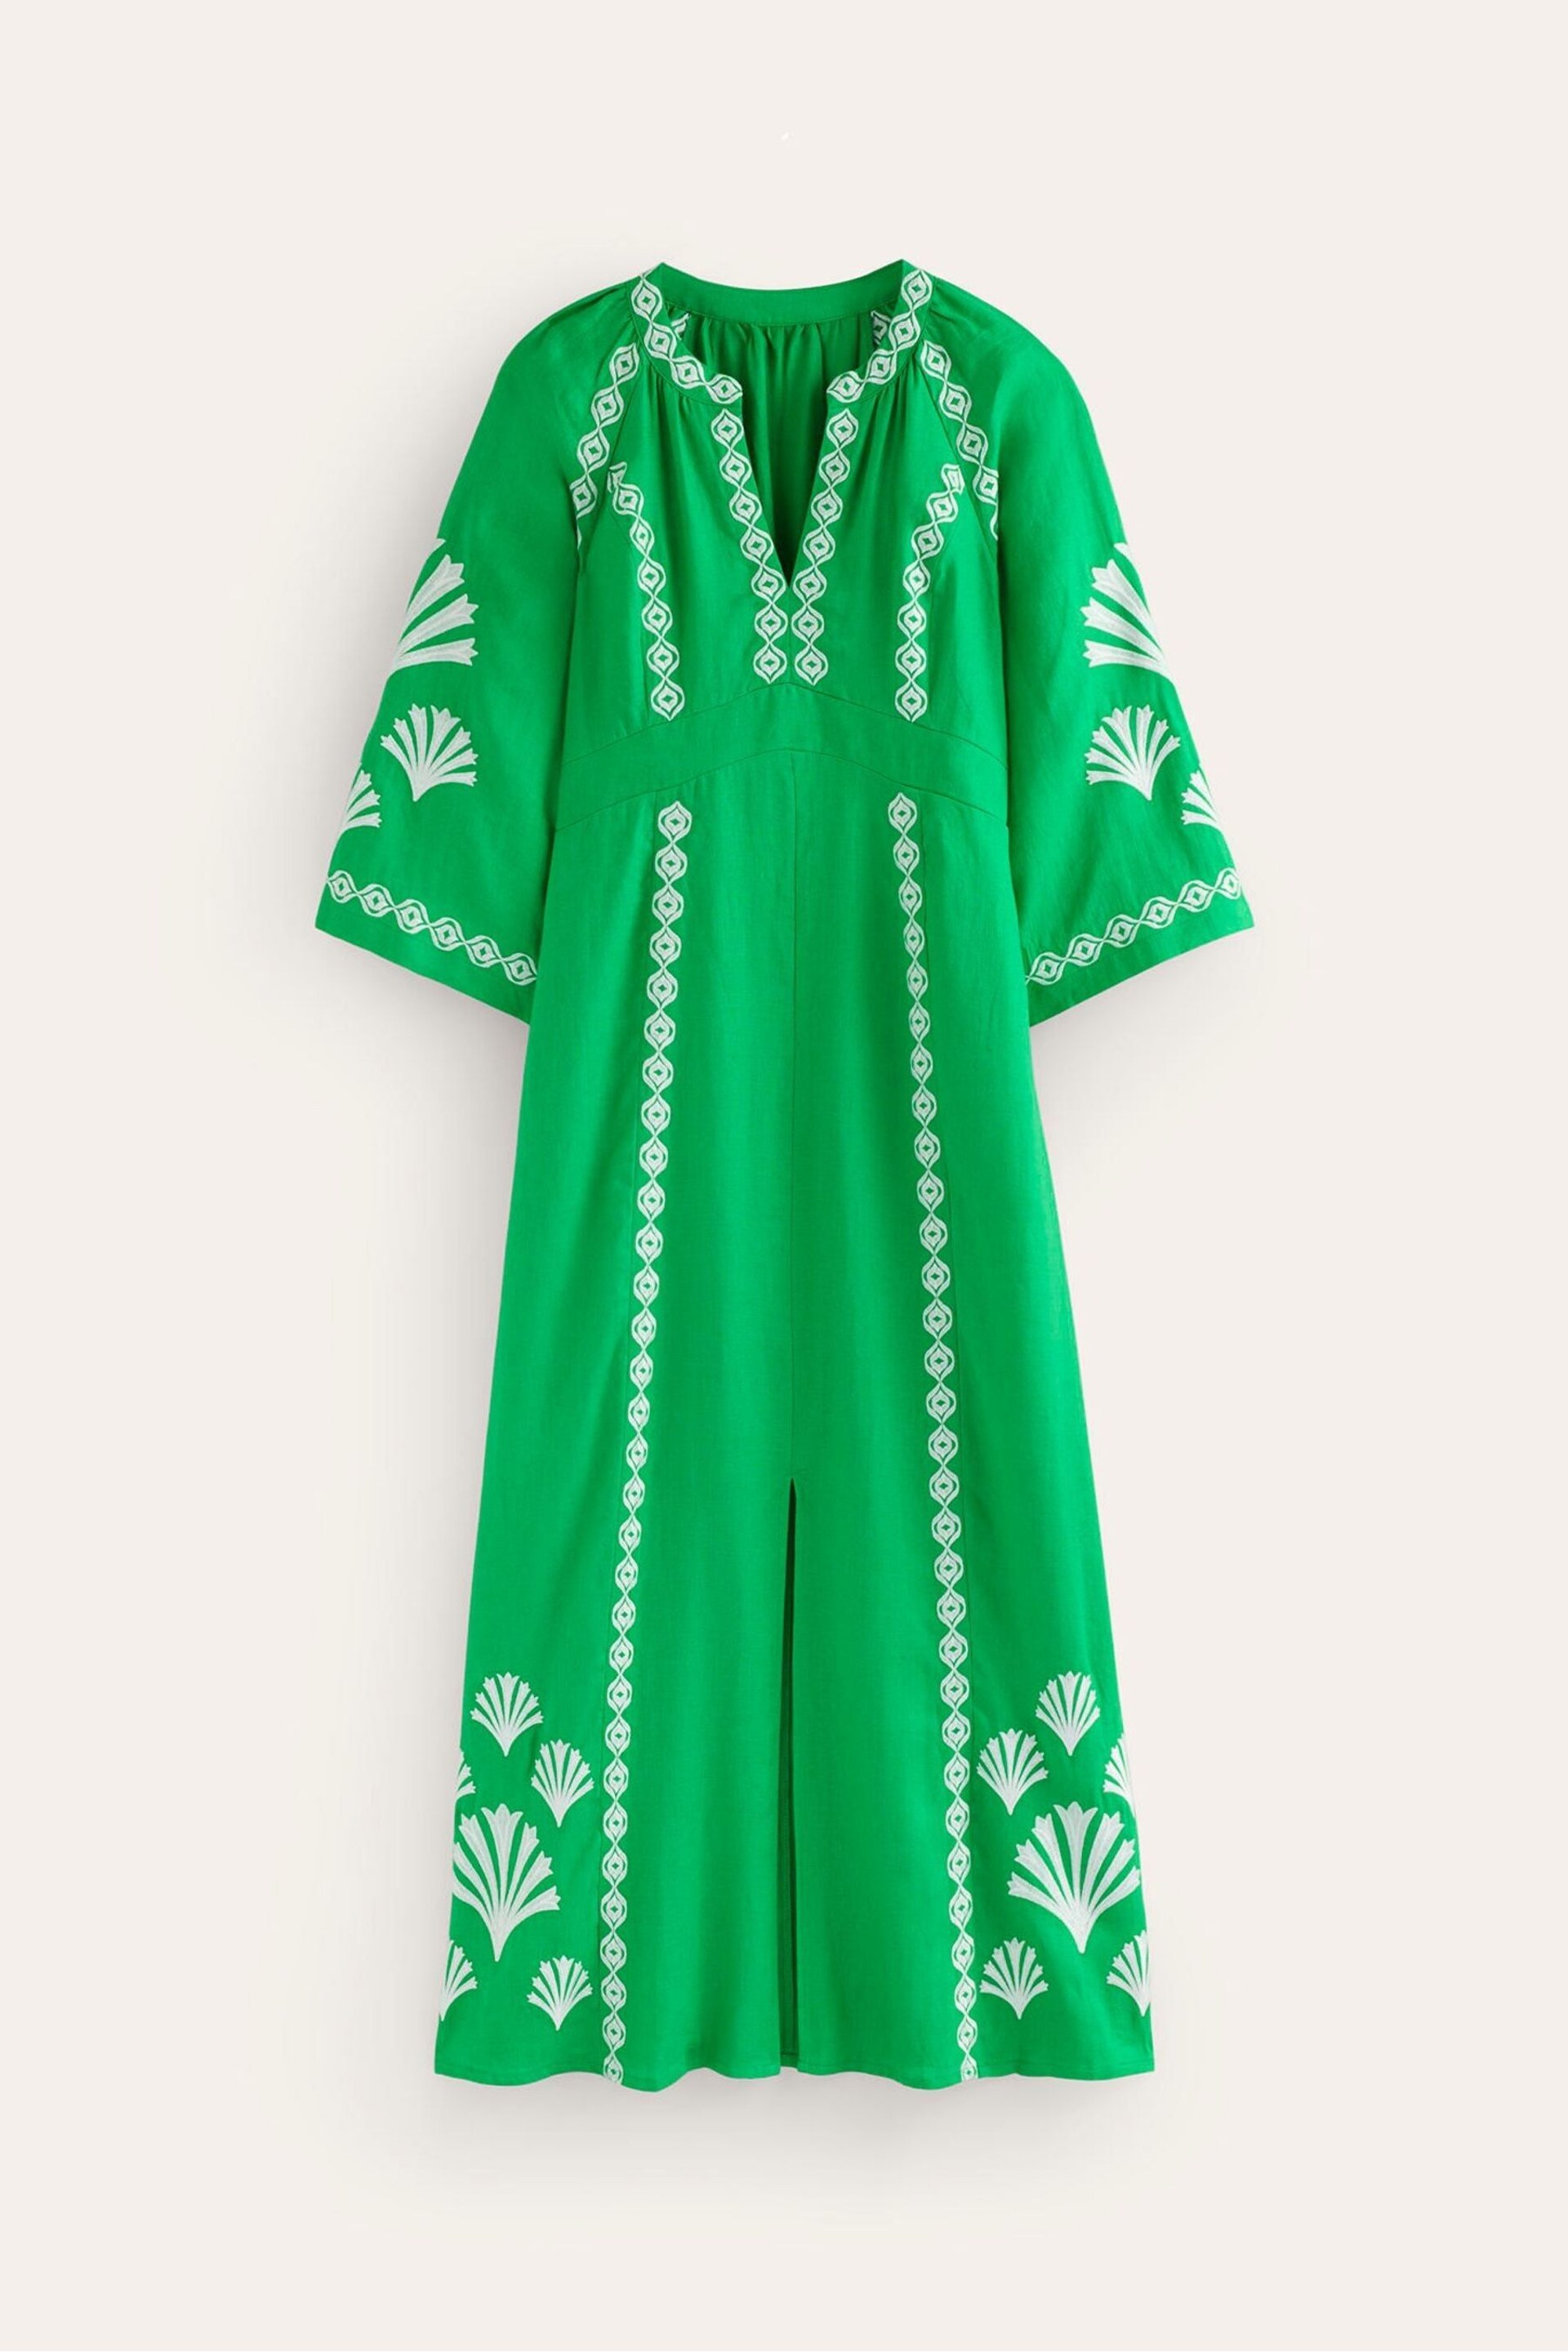 Boden Green Una Linen Embroidered Dress - Image 5 of 5